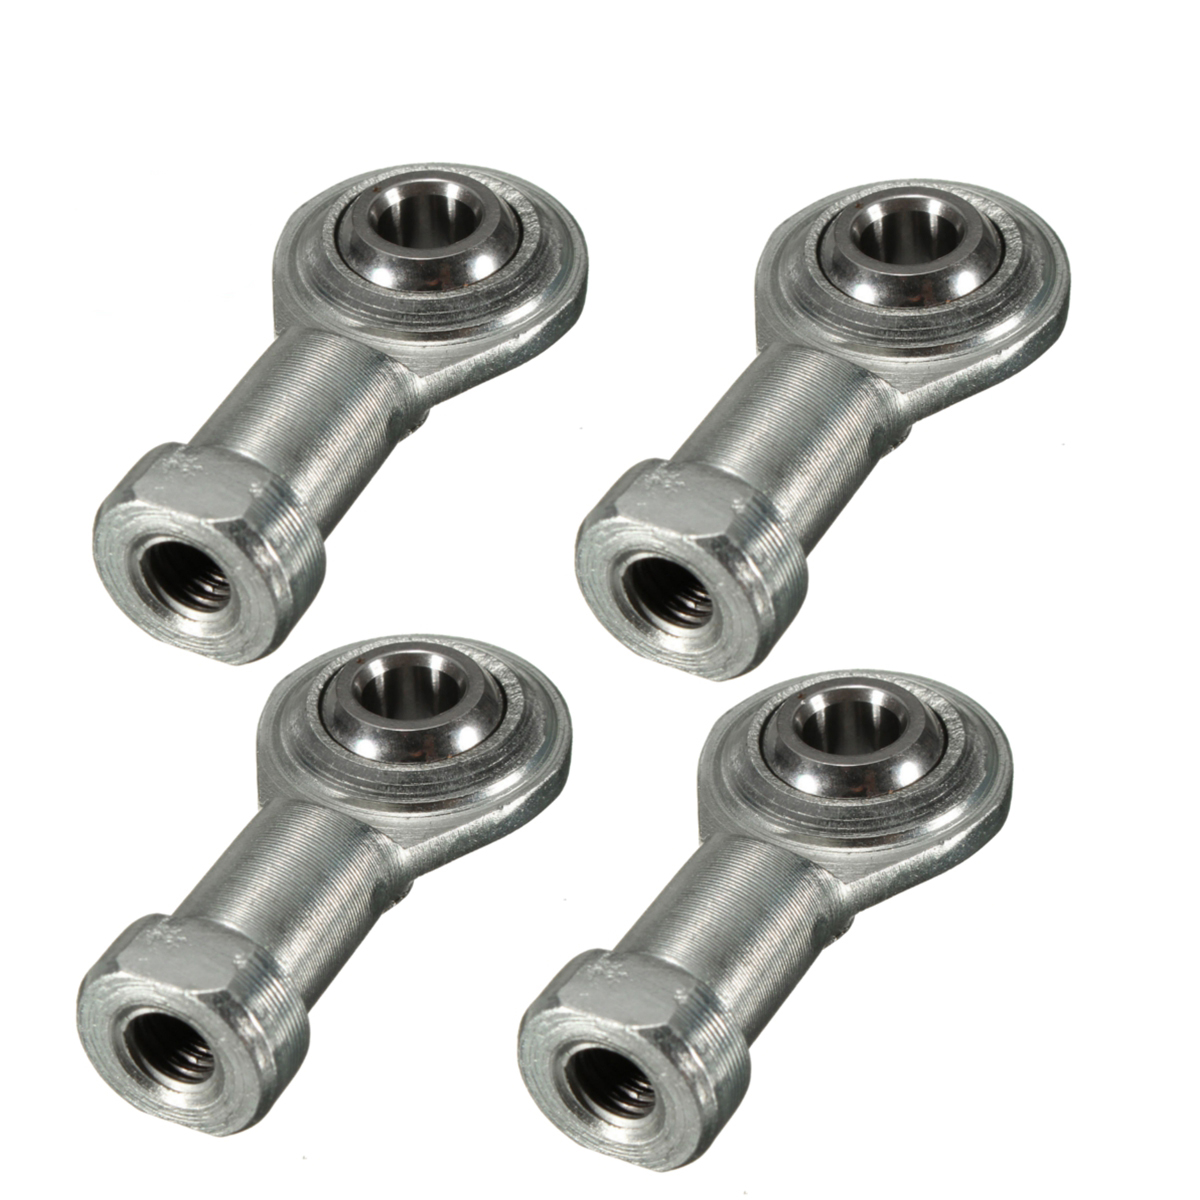 4pcs-M6-x-1mm-Right-Hand-Thread-Rod-End-Joint-Bearing-6mm-Female-Thread-Joint-Ball-Bearing-1586681-1